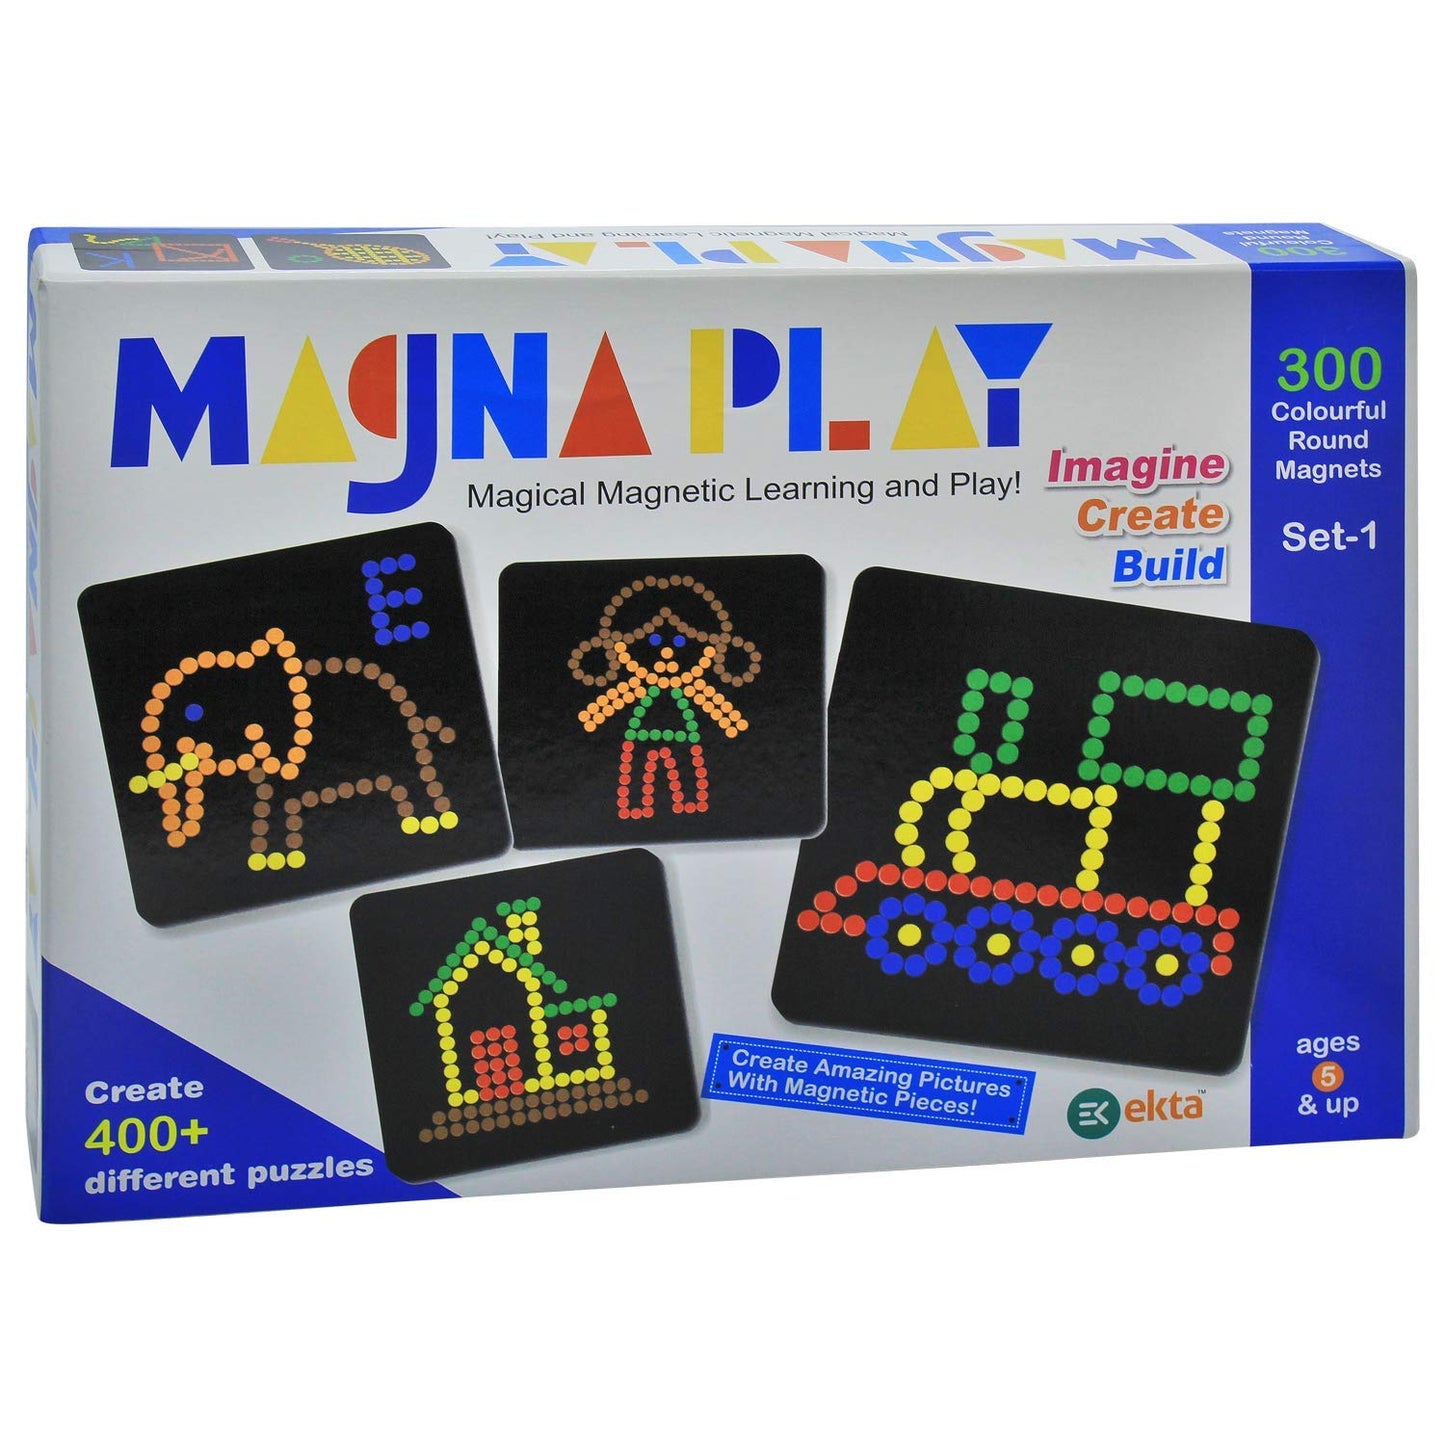 Ekta Magna Play Set - 1: Magnetic Play N Learn Art Draw with Double-sided Wooden Stand, Metallic Canvas & 300 Colourful Puzzles